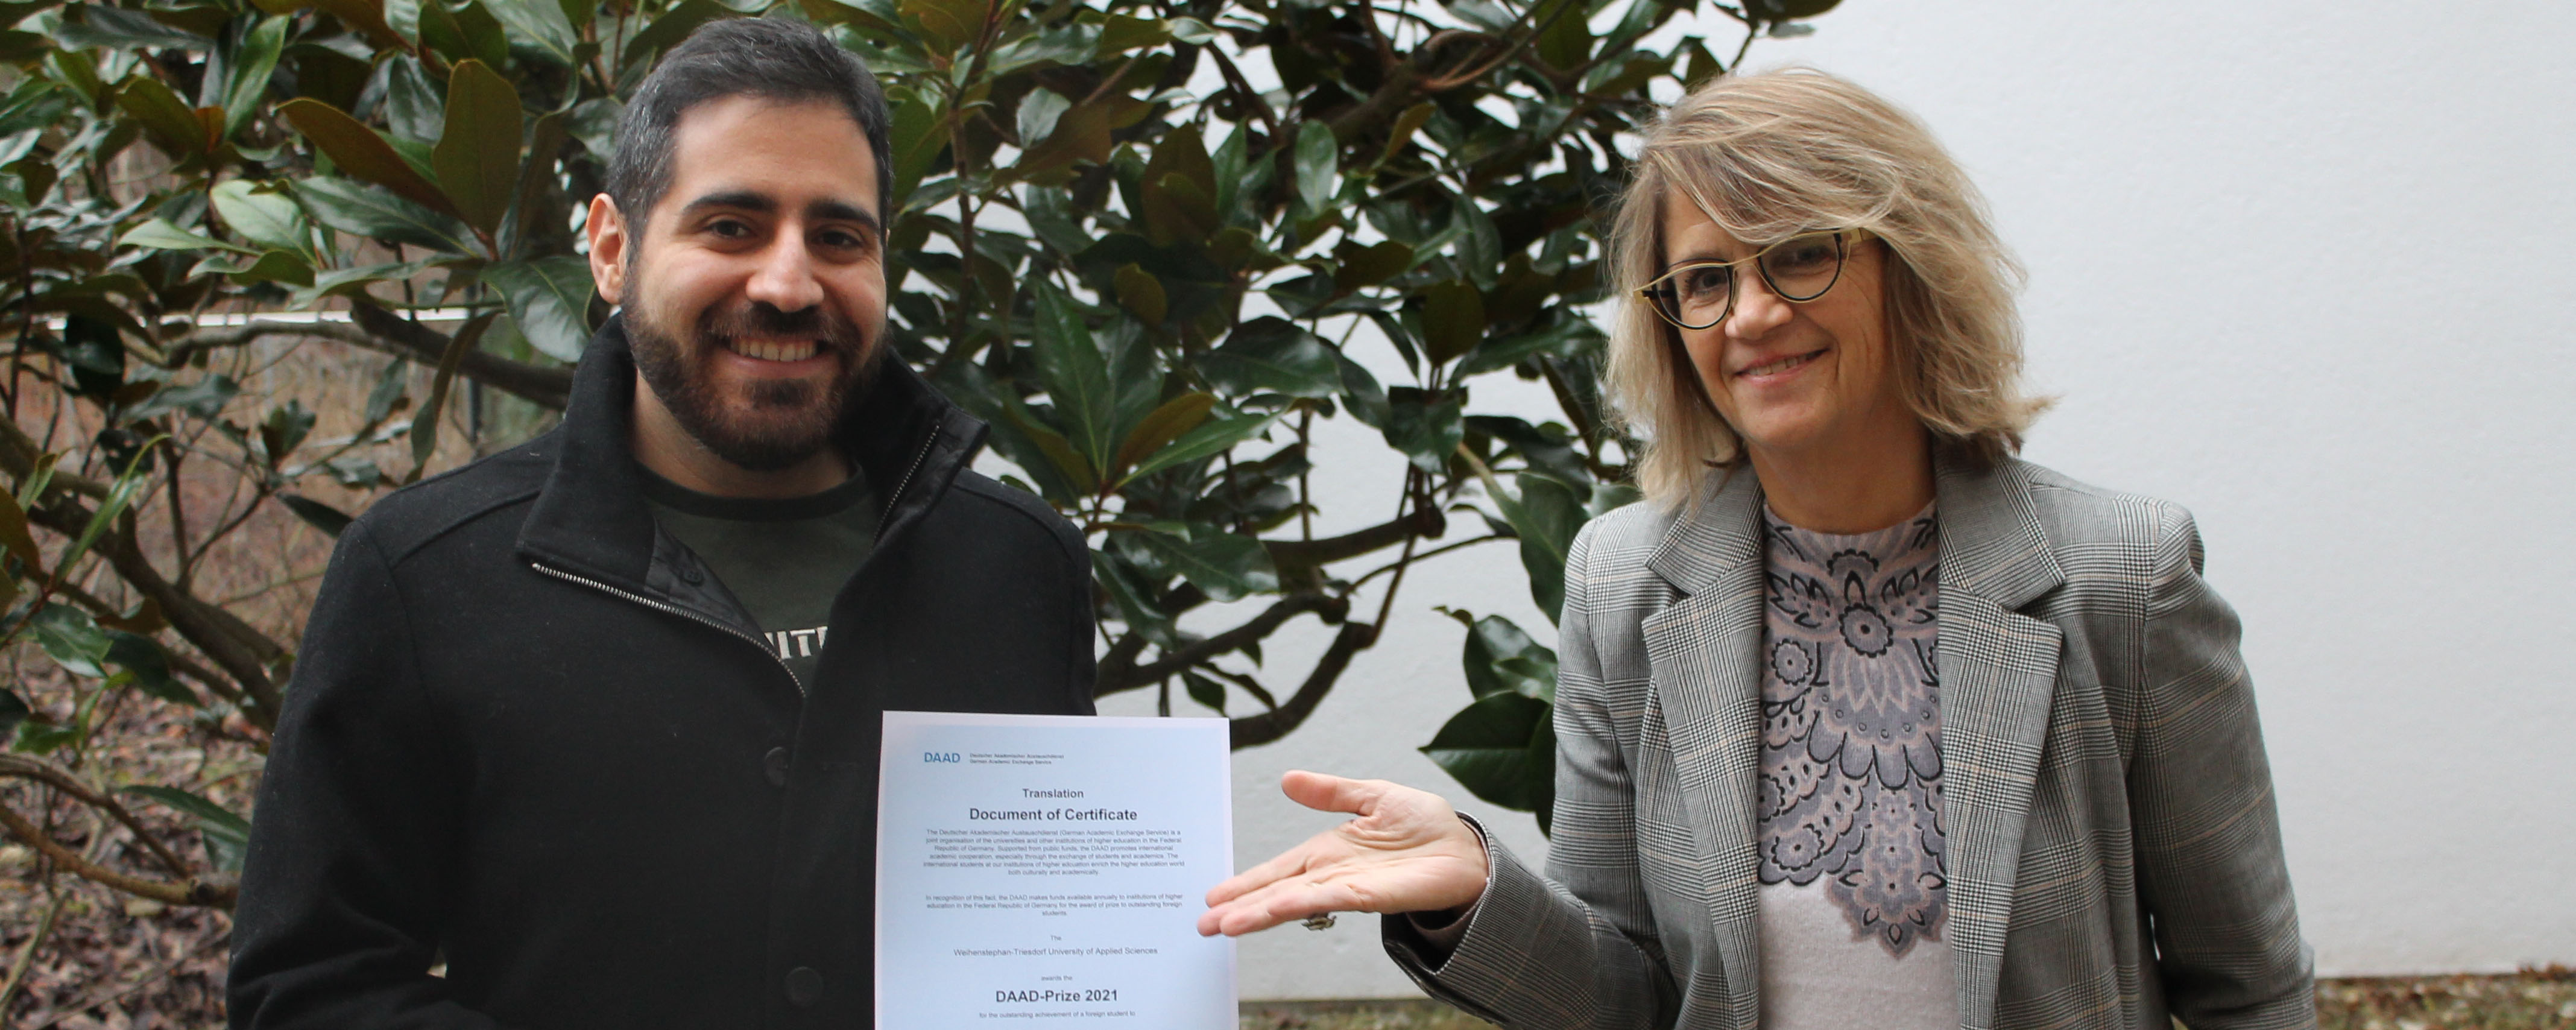 slide - Photo in the garden, background shrub. Paul Maksoud with certificate (left in picture), Prof. Ingrid Schegk (right in picture).